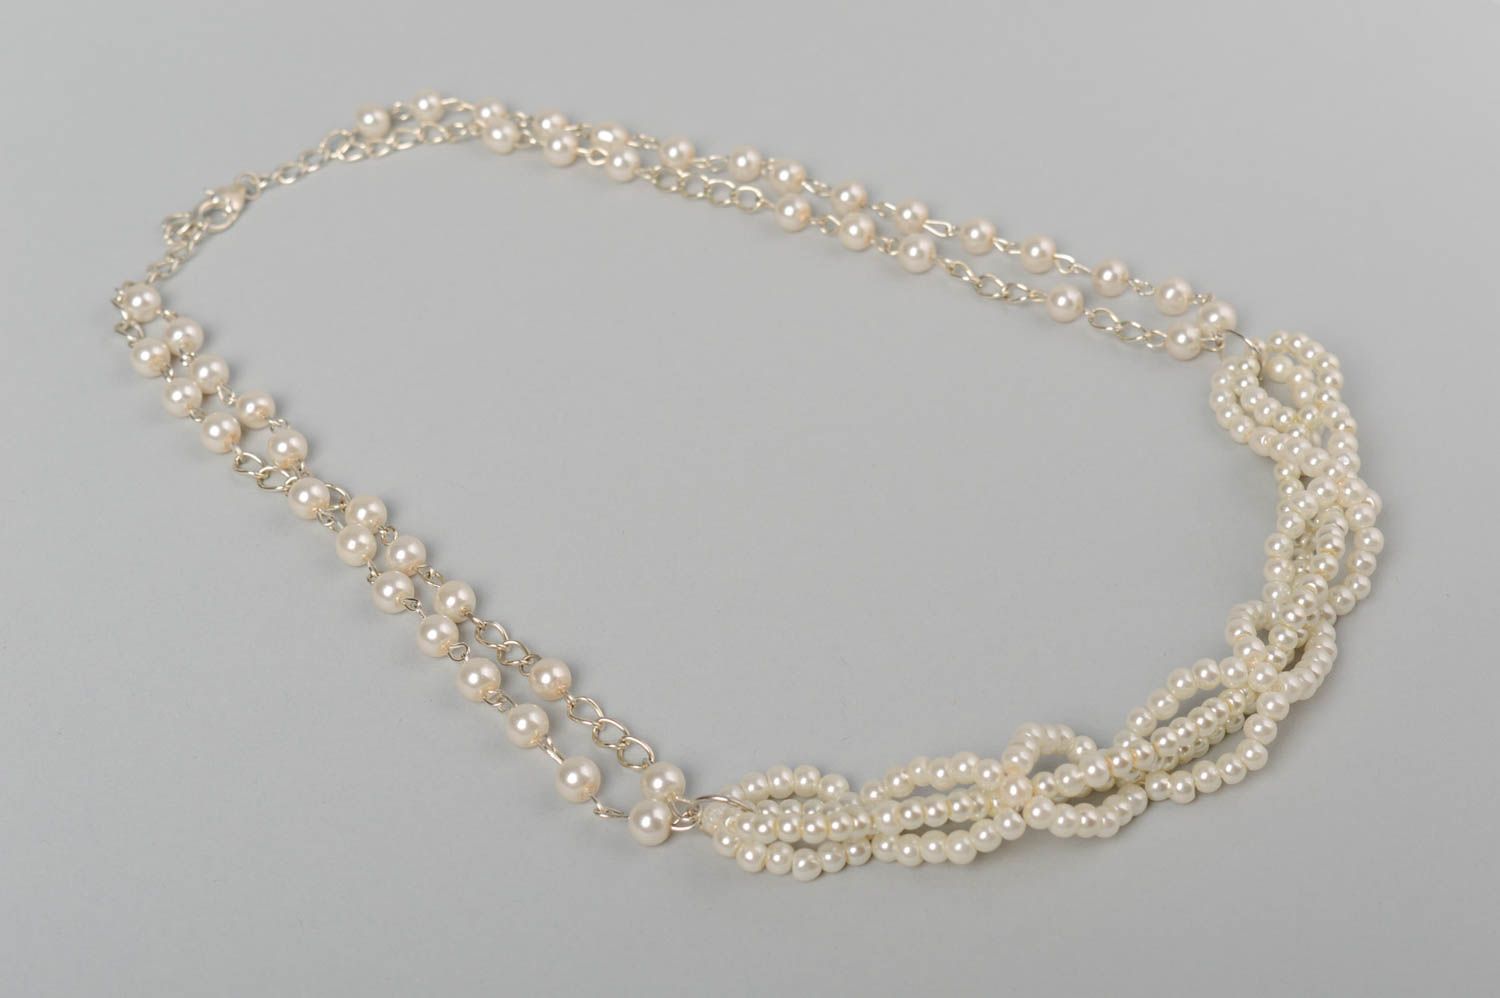 Handmade decorative white ceramic pearl beads necklace long fancy accessory photo 2